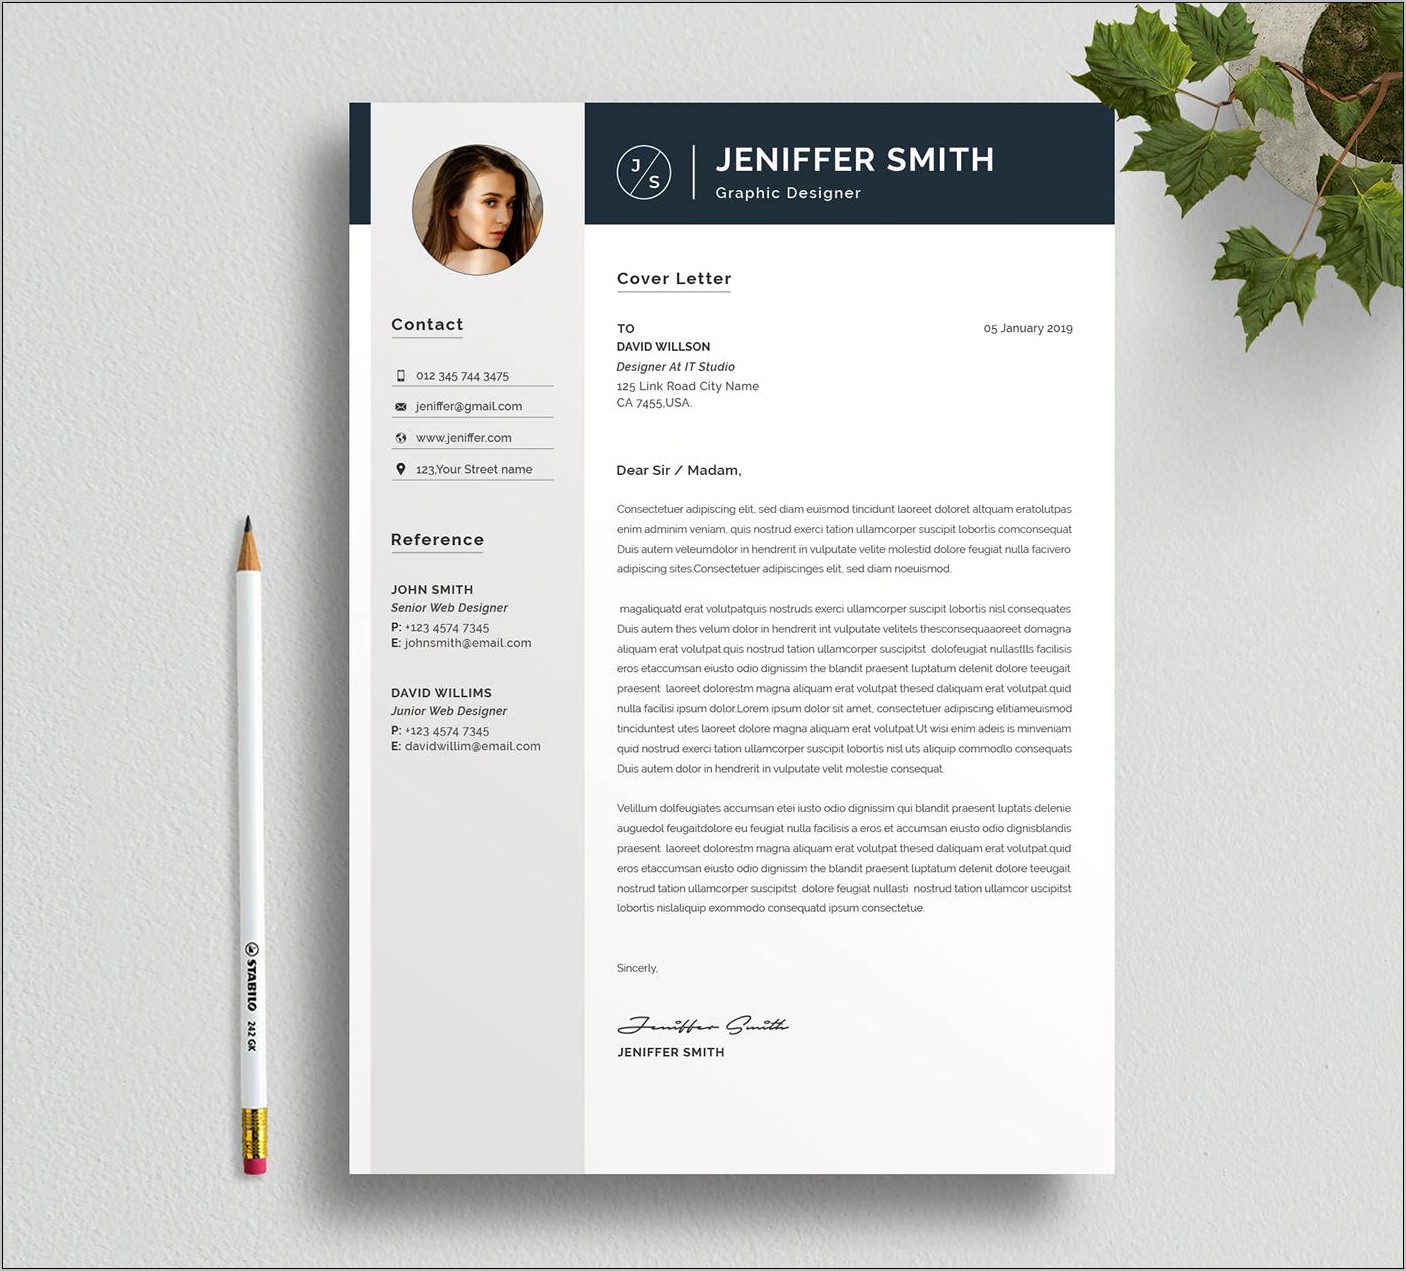 Format Word Documents For Resumes Free Download